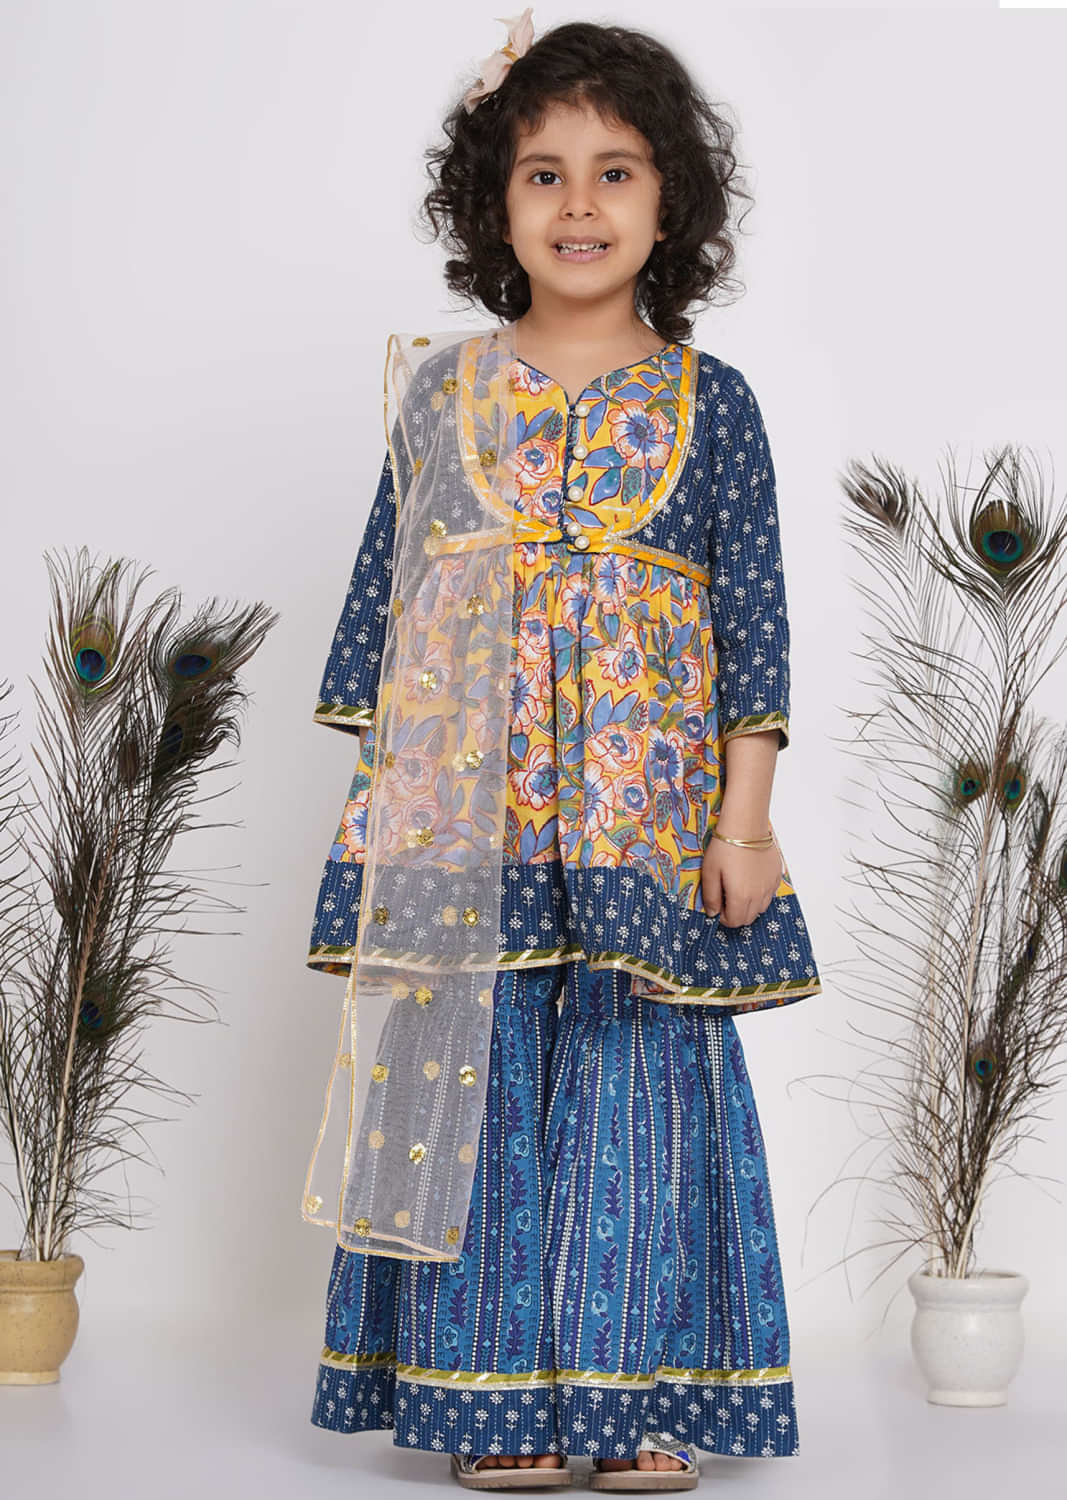 Kalki Royal Blue Sharara Suit Set For Girls In Cotton With Floral Print And A Jacket